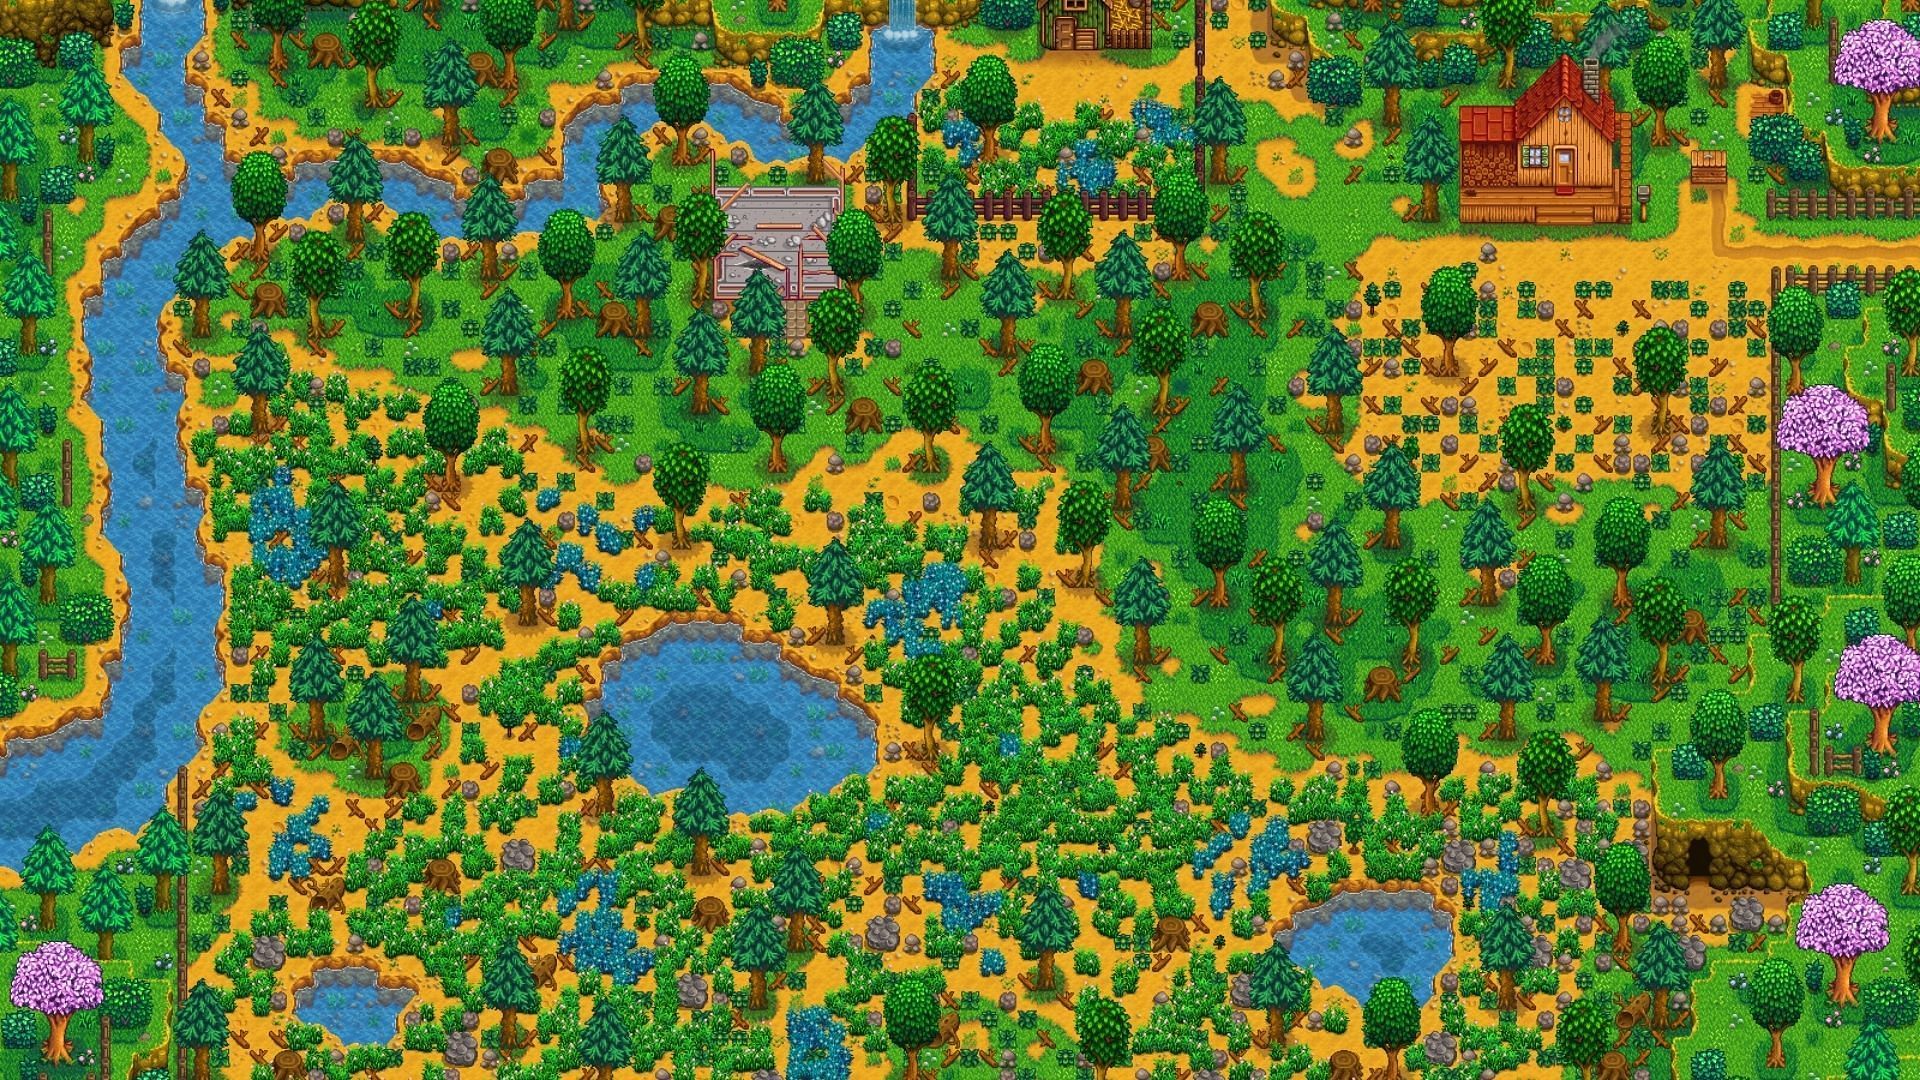 The Meadow Farm layout is designed for raising animals rather than standard farming. (Image via ConcernedApe)